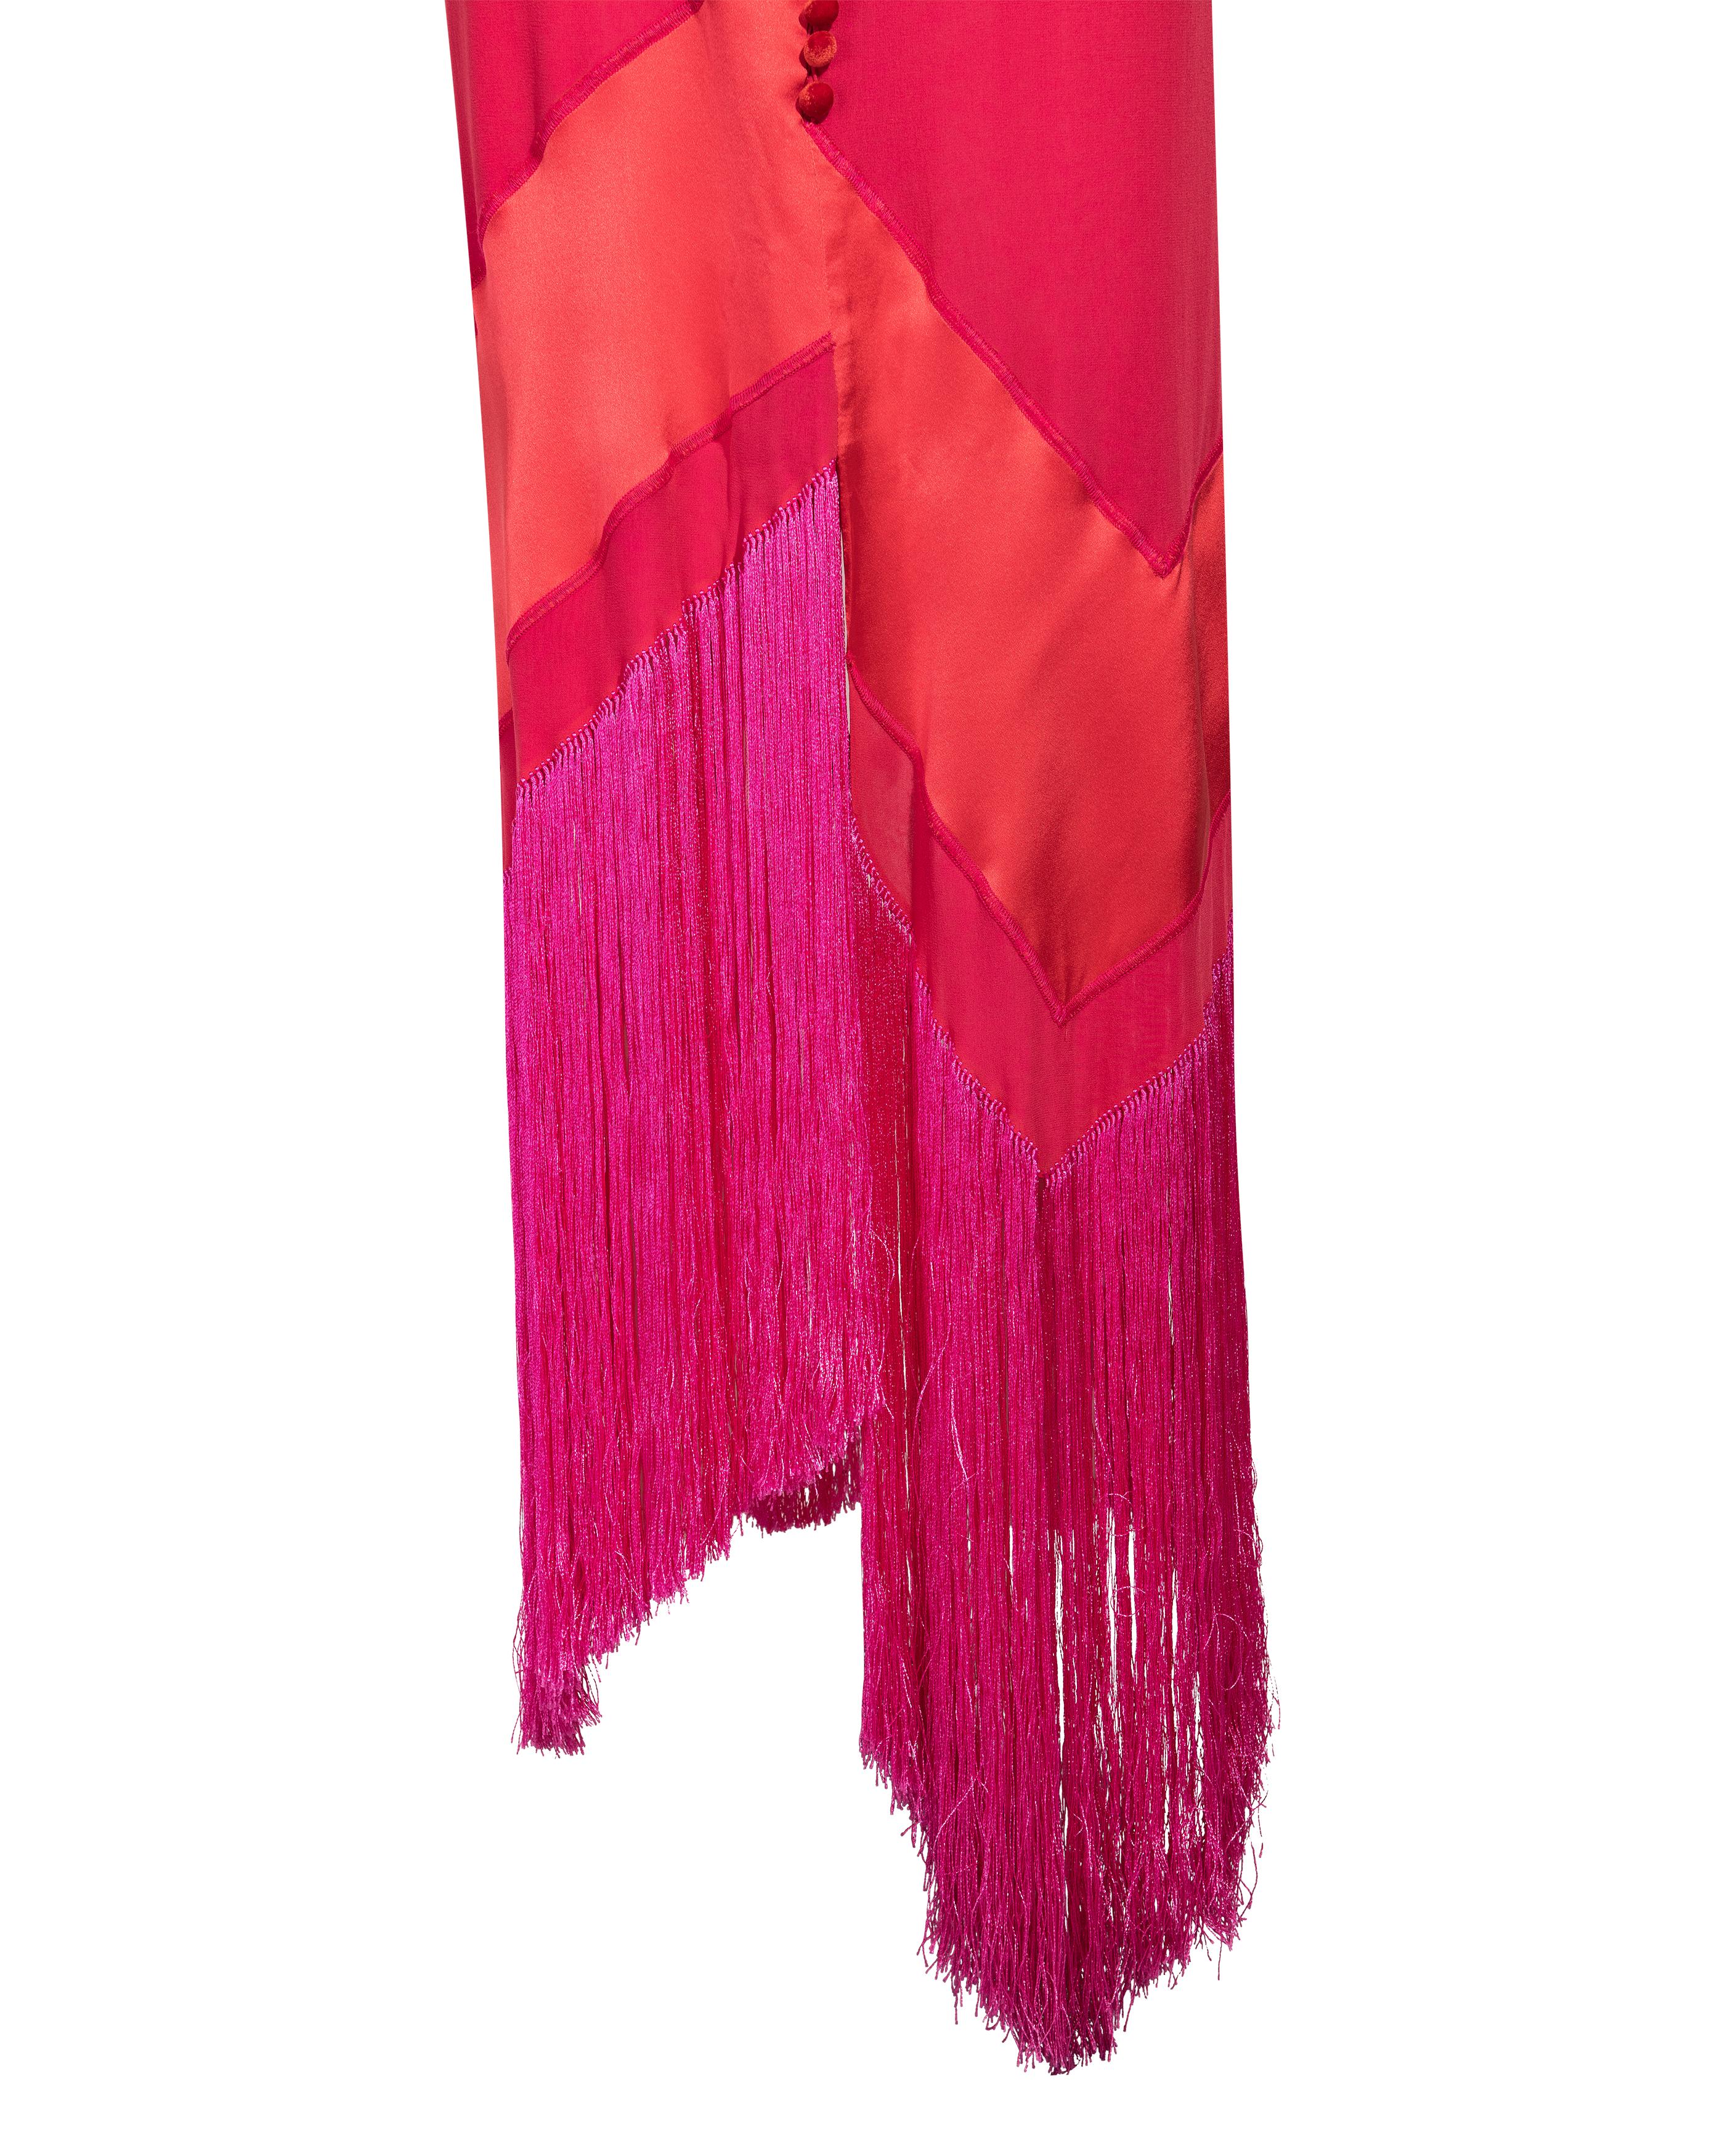 1980's Gianfranco Ferre Red Silk Midi Dress with Hot Pink Fringe For Sale 1